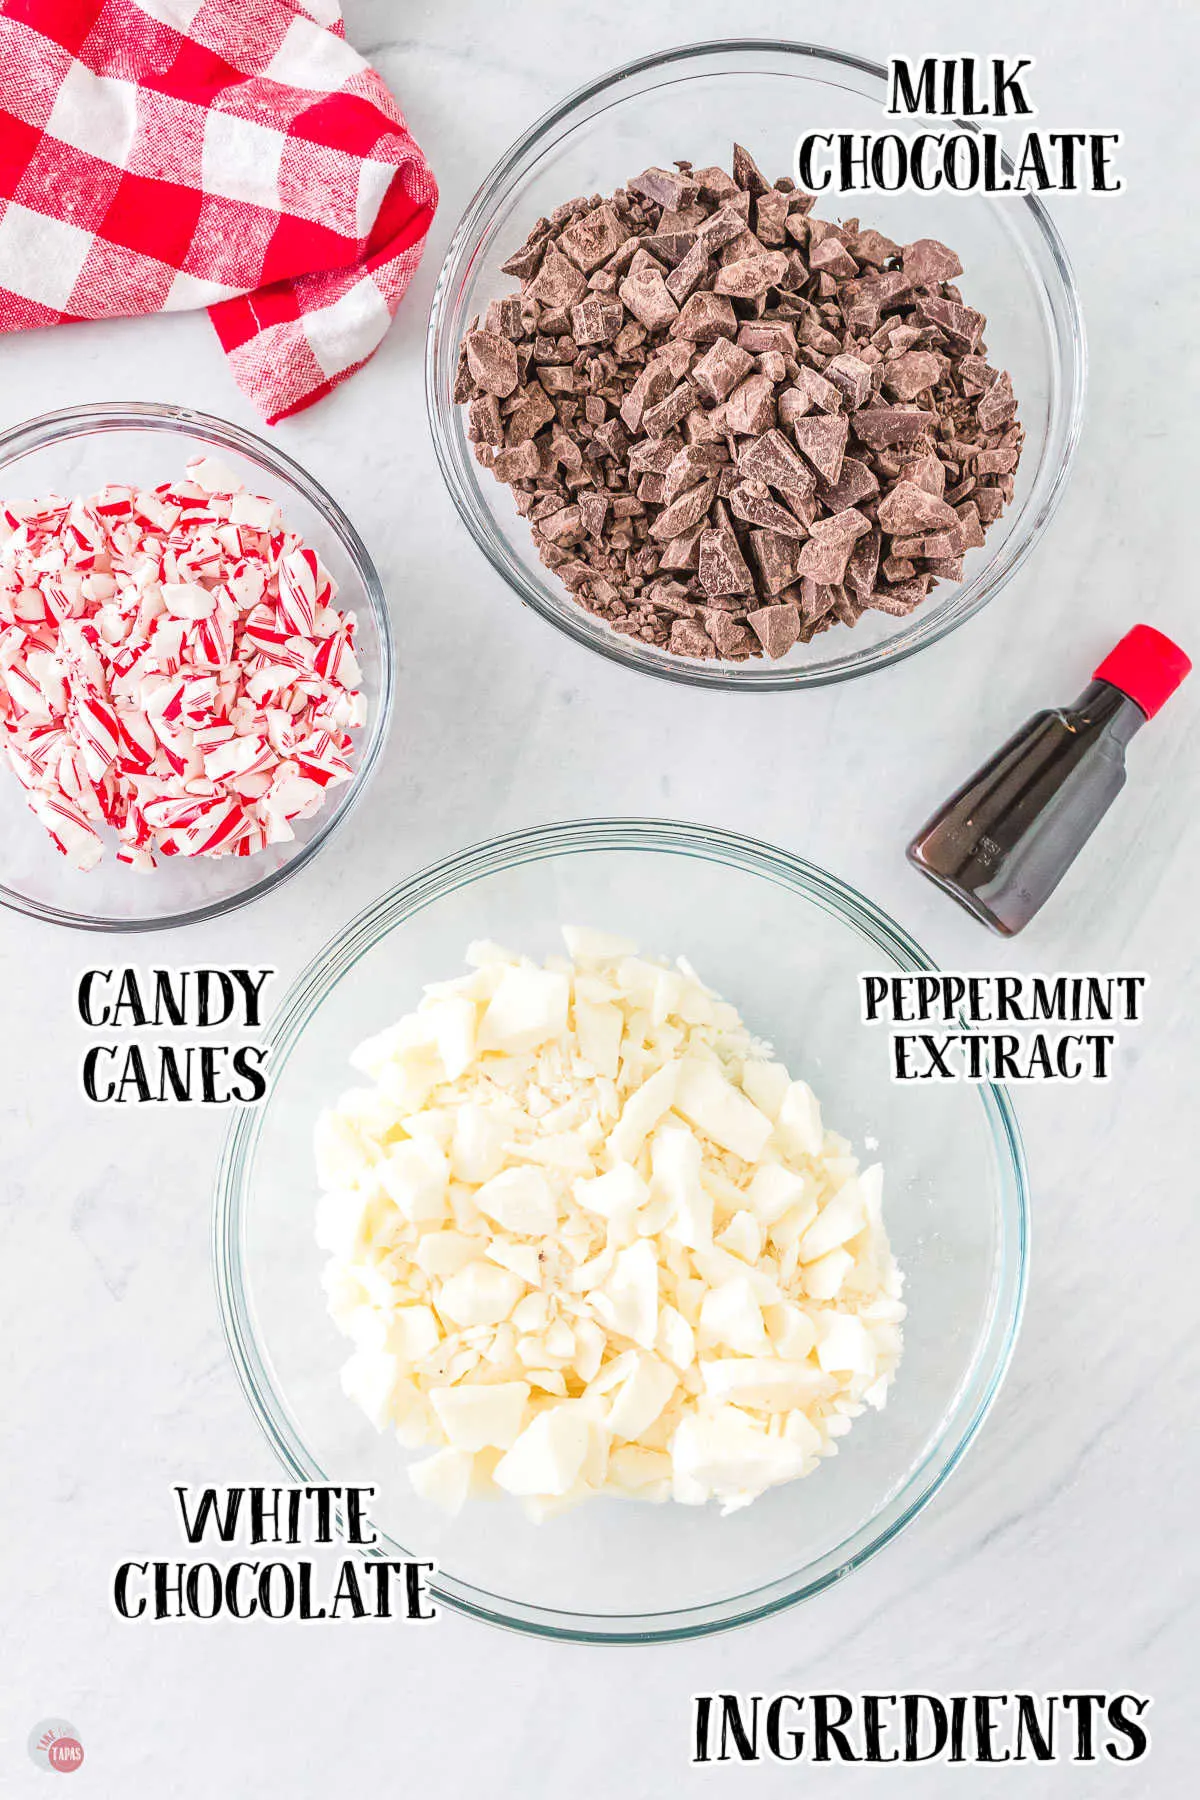 ingredients for candy cane bark